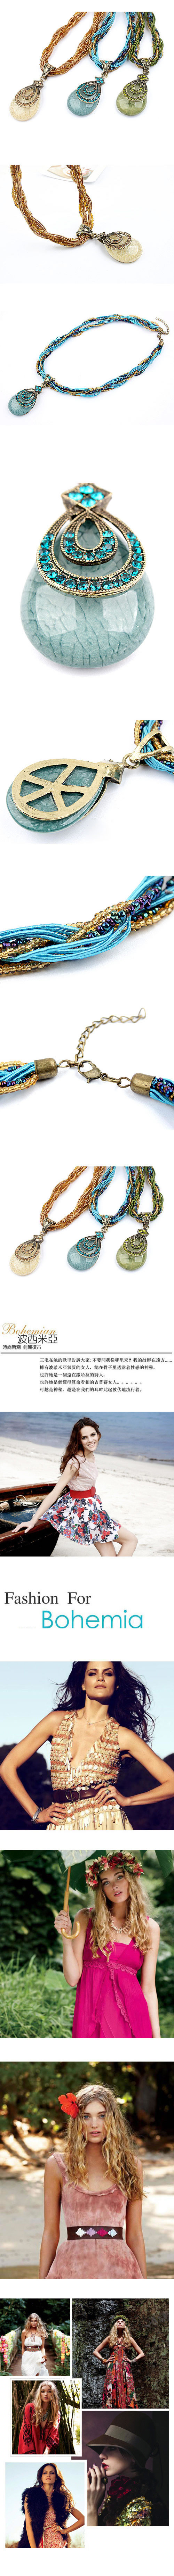 Model:  Item Brand: Beaded Necklaces,Beaded Necklaces